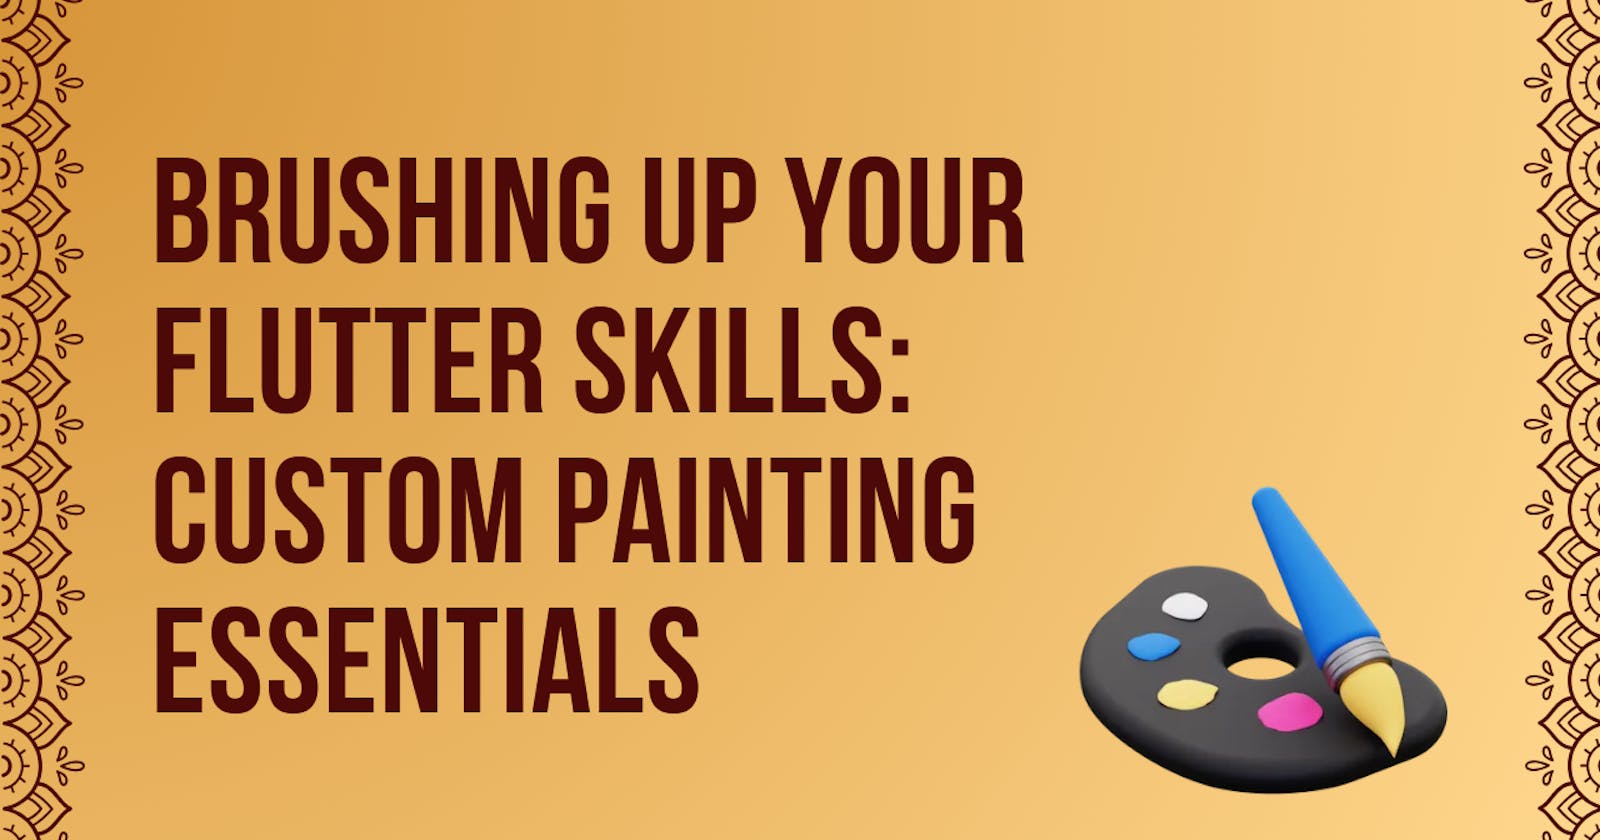 Brushing Up Your Flutter Skills: Custom Painting Essentials